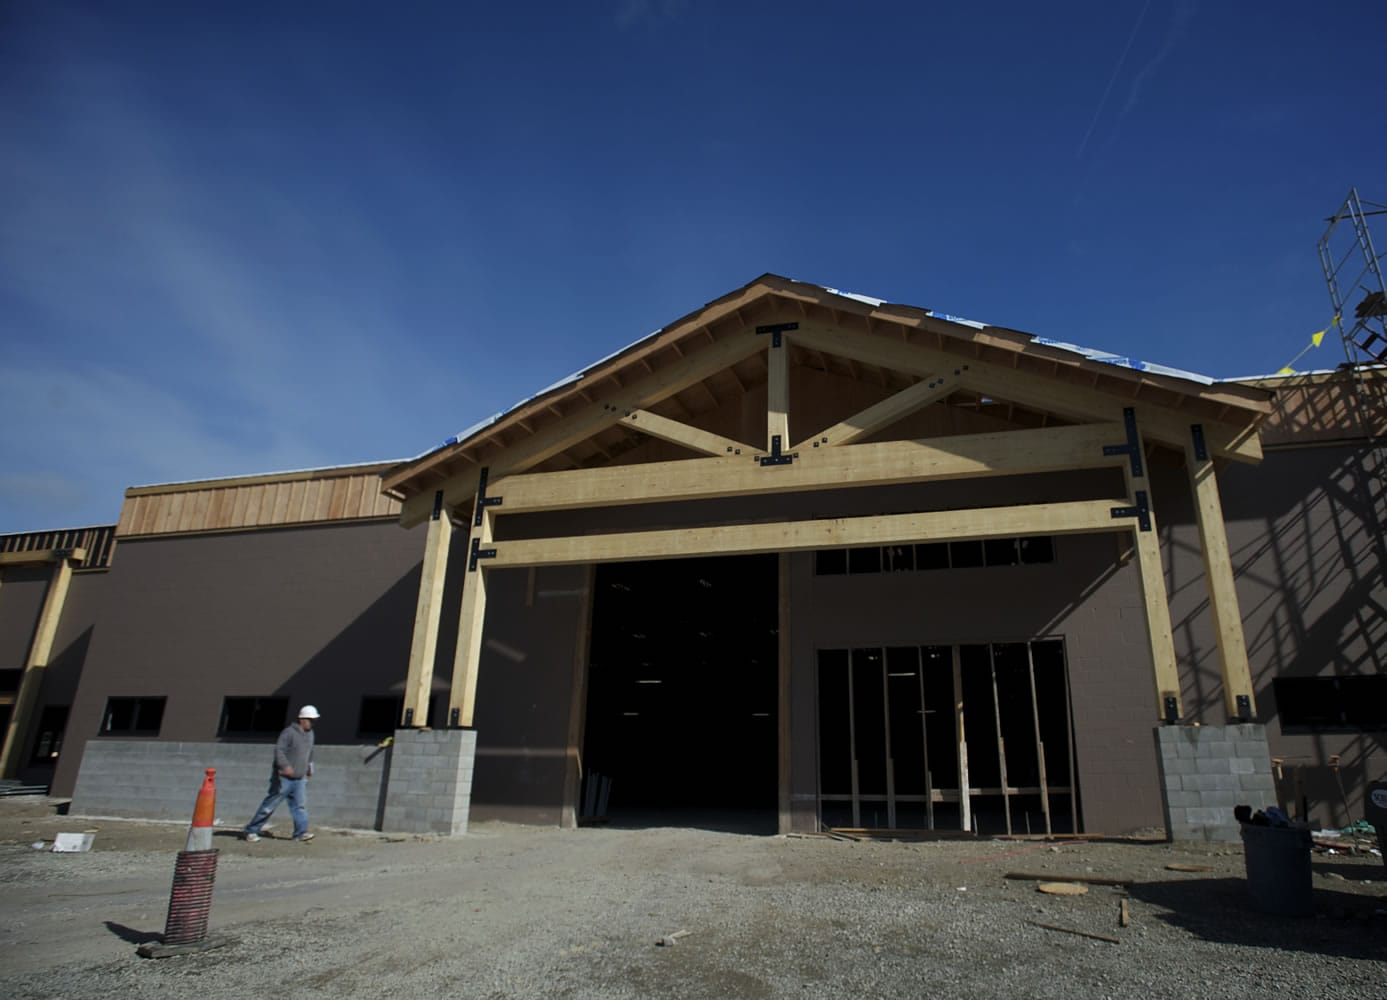 Work continues on the new Chuck's Produce and Street Market, Clark County's second Chuck's, in Salmon Creek on Wednesday.